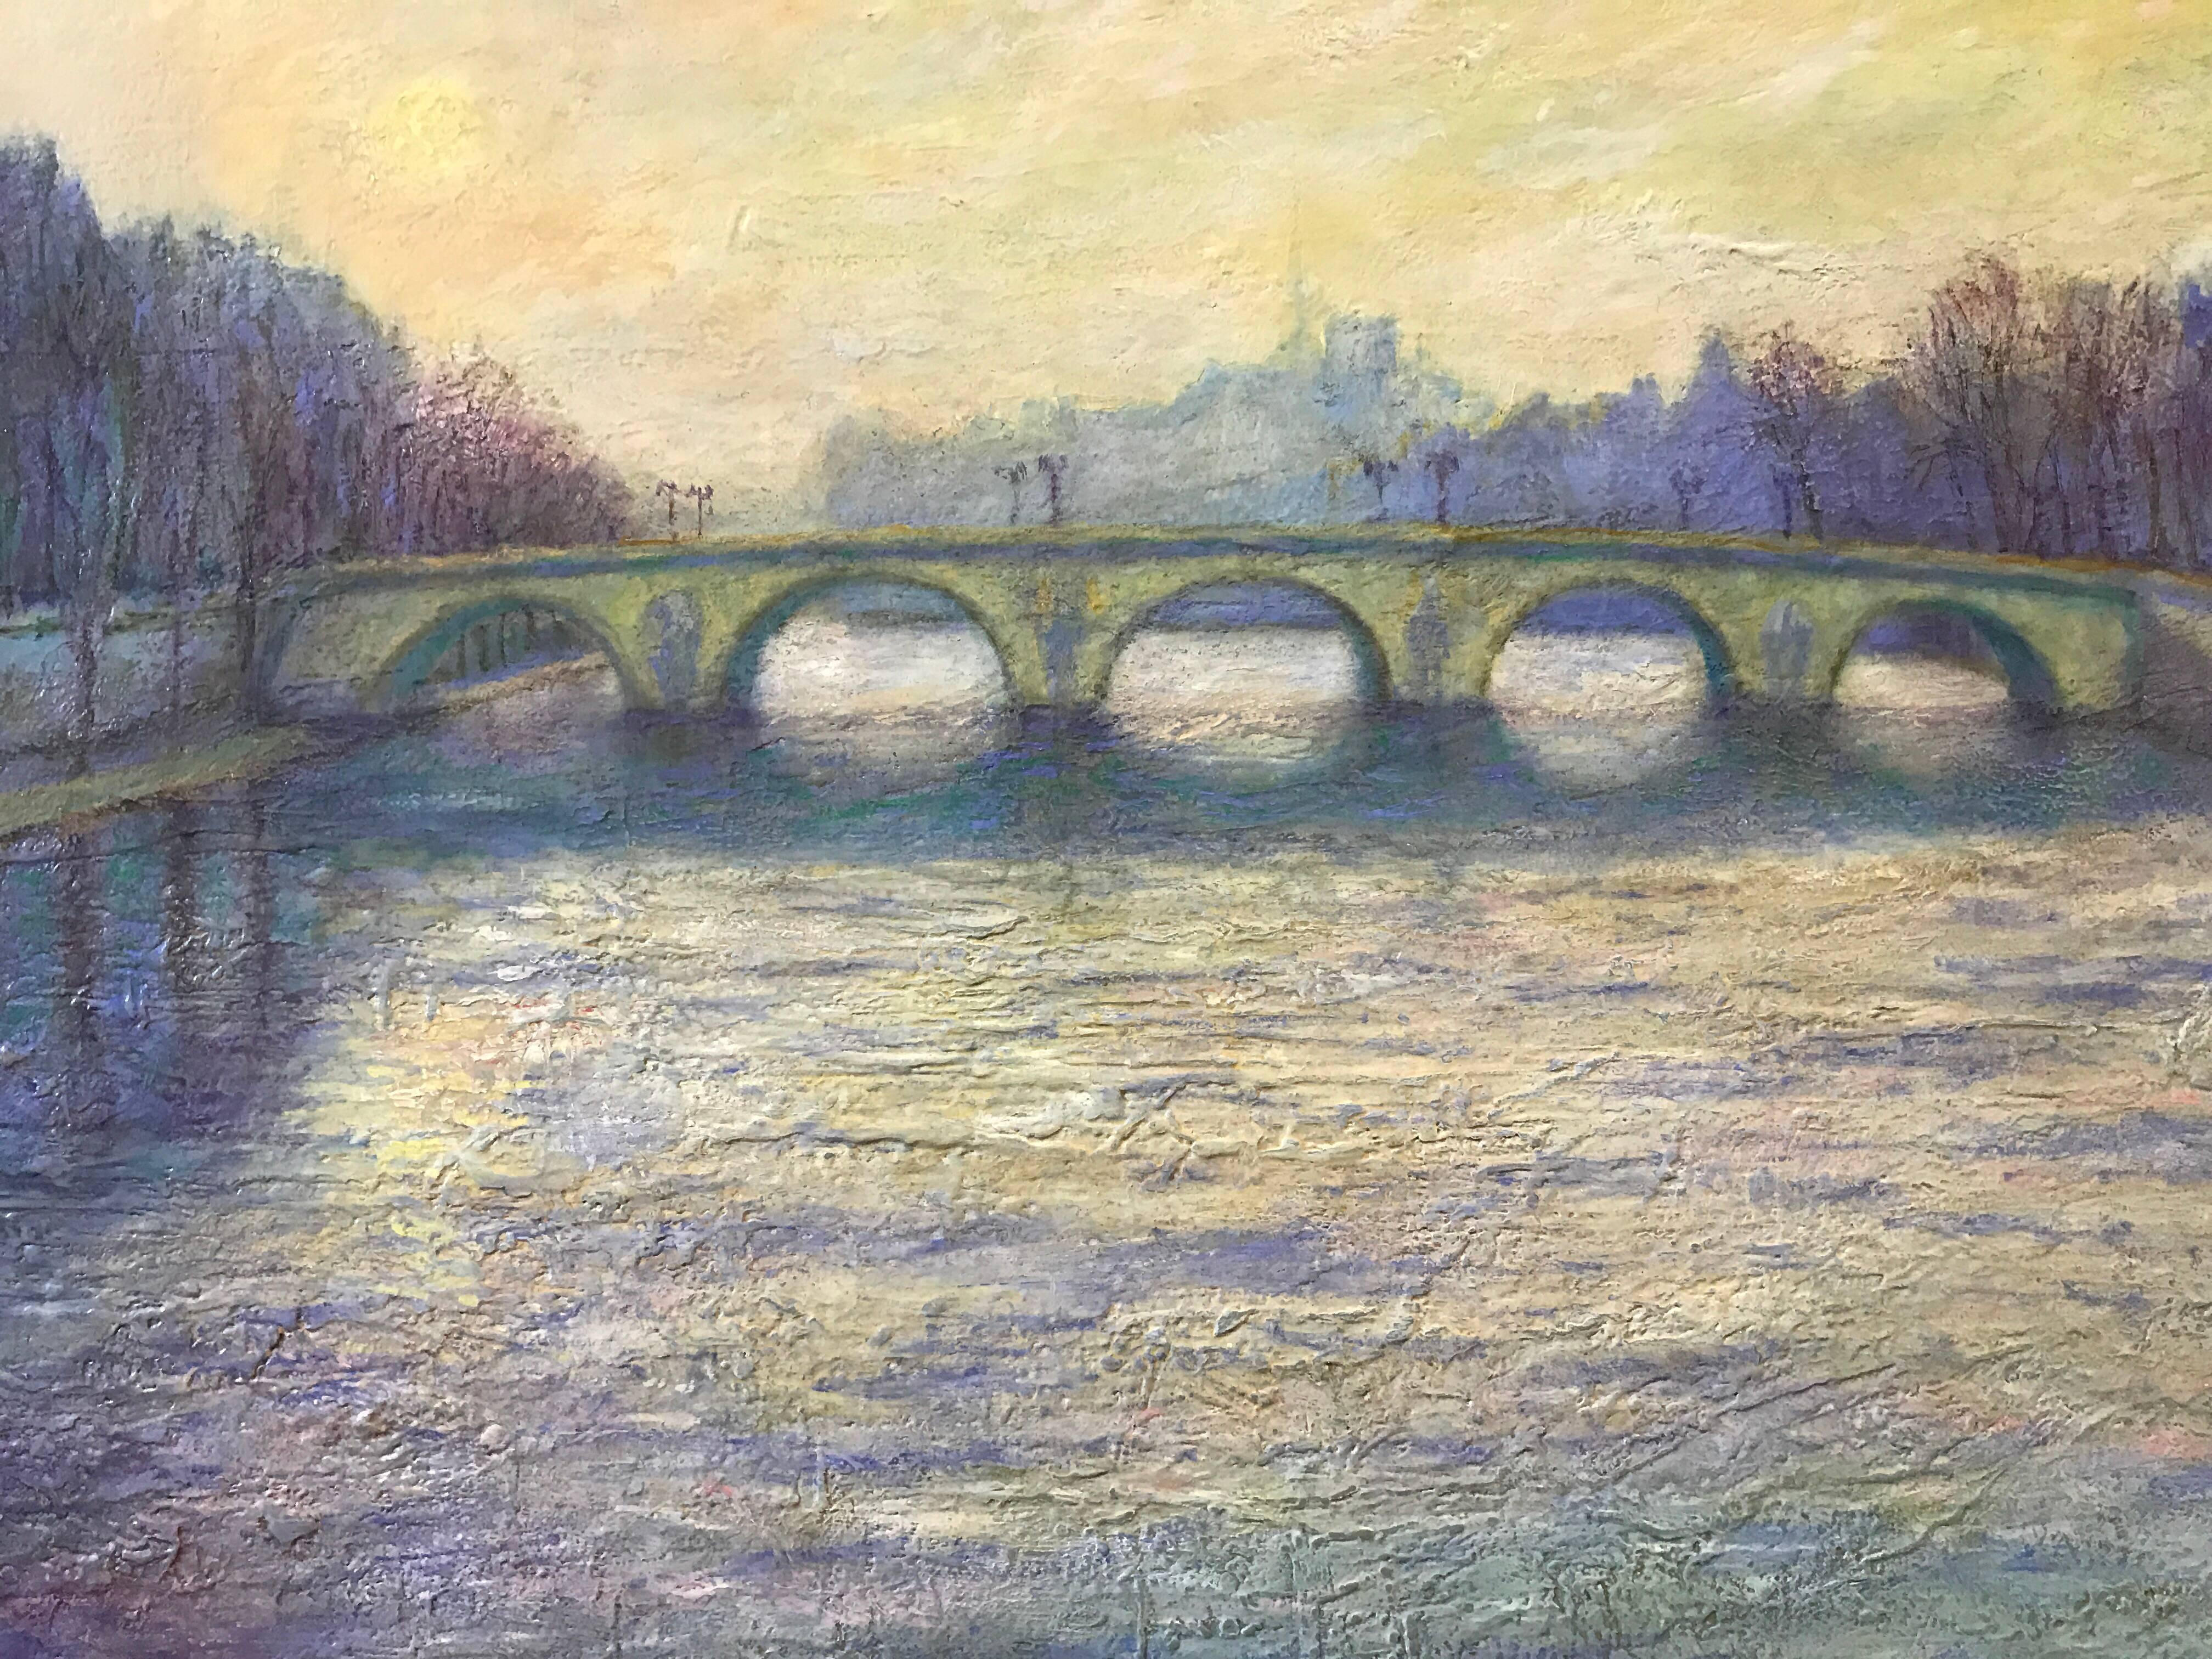 Stunning original oil on linen painting of Le Pont Paris by acclaimed American artist Jeffrey Leitz, Connecticut. Features 23-karat gold leaf closed-corner frame by Boston, MA frame maker, Guido Studios. Unframed dimensions are 28.5 inches by 24